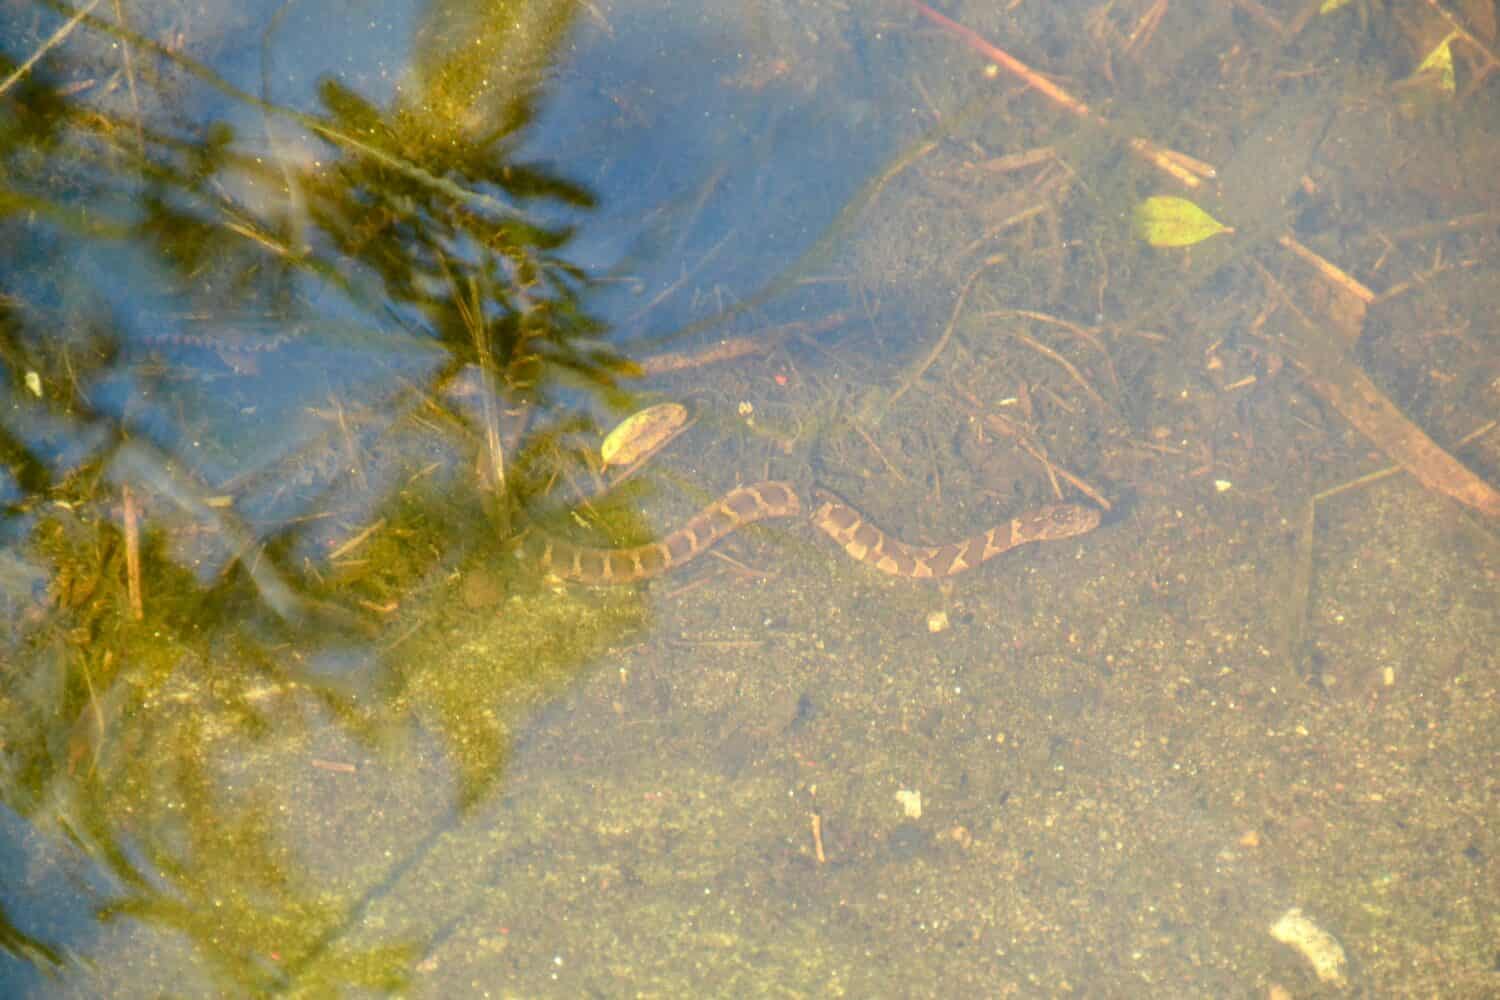 Northern watersnake (Nerodia sipedon) swimming underwater along hiking trail at Torrance Barrens during Summer